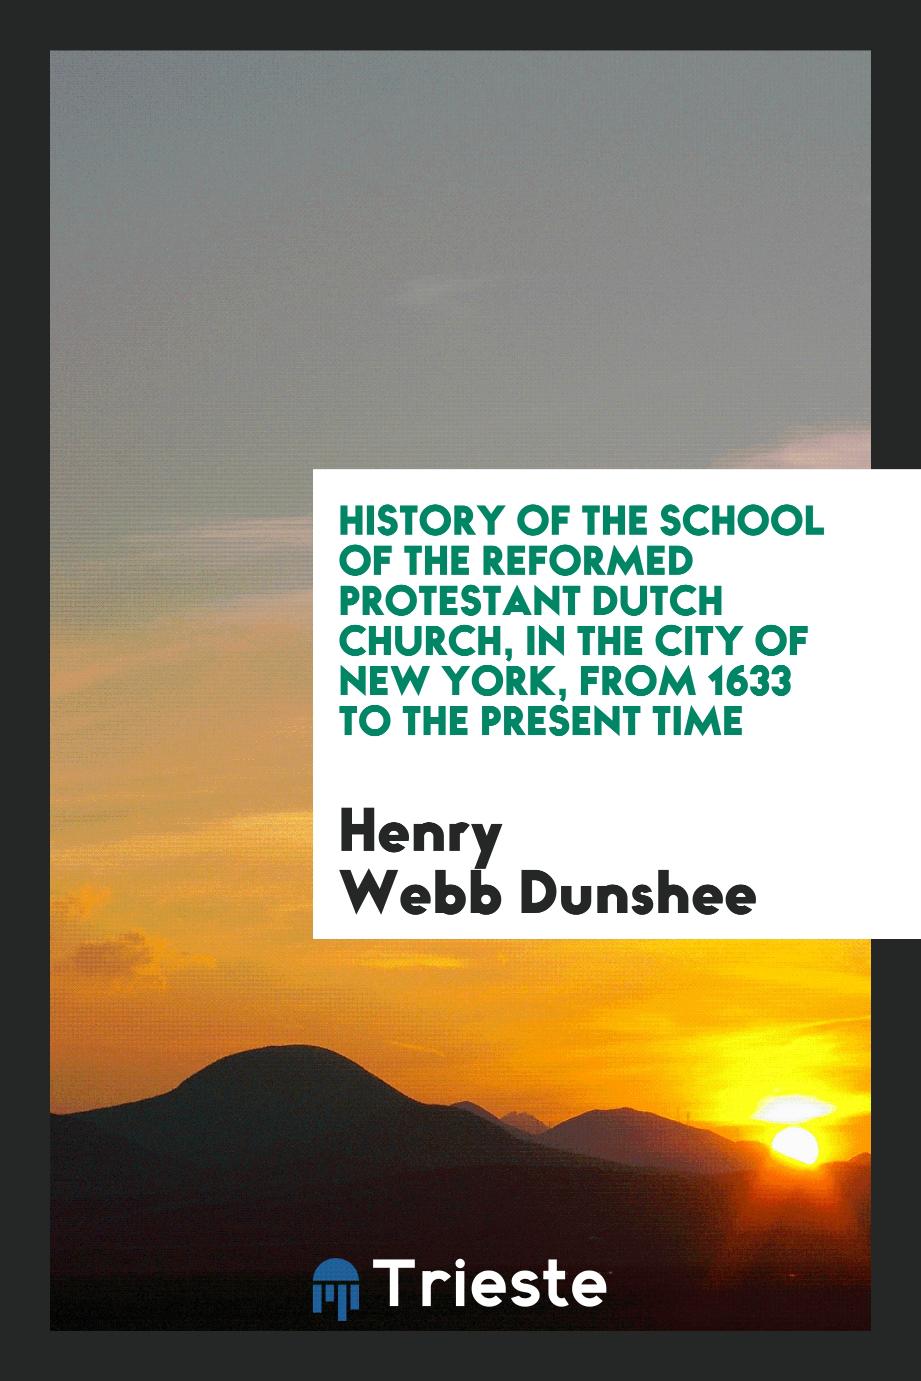 History of the School of the Reformed Protestant Dutch Church, in the City of New York, from 1633 to the Present Time